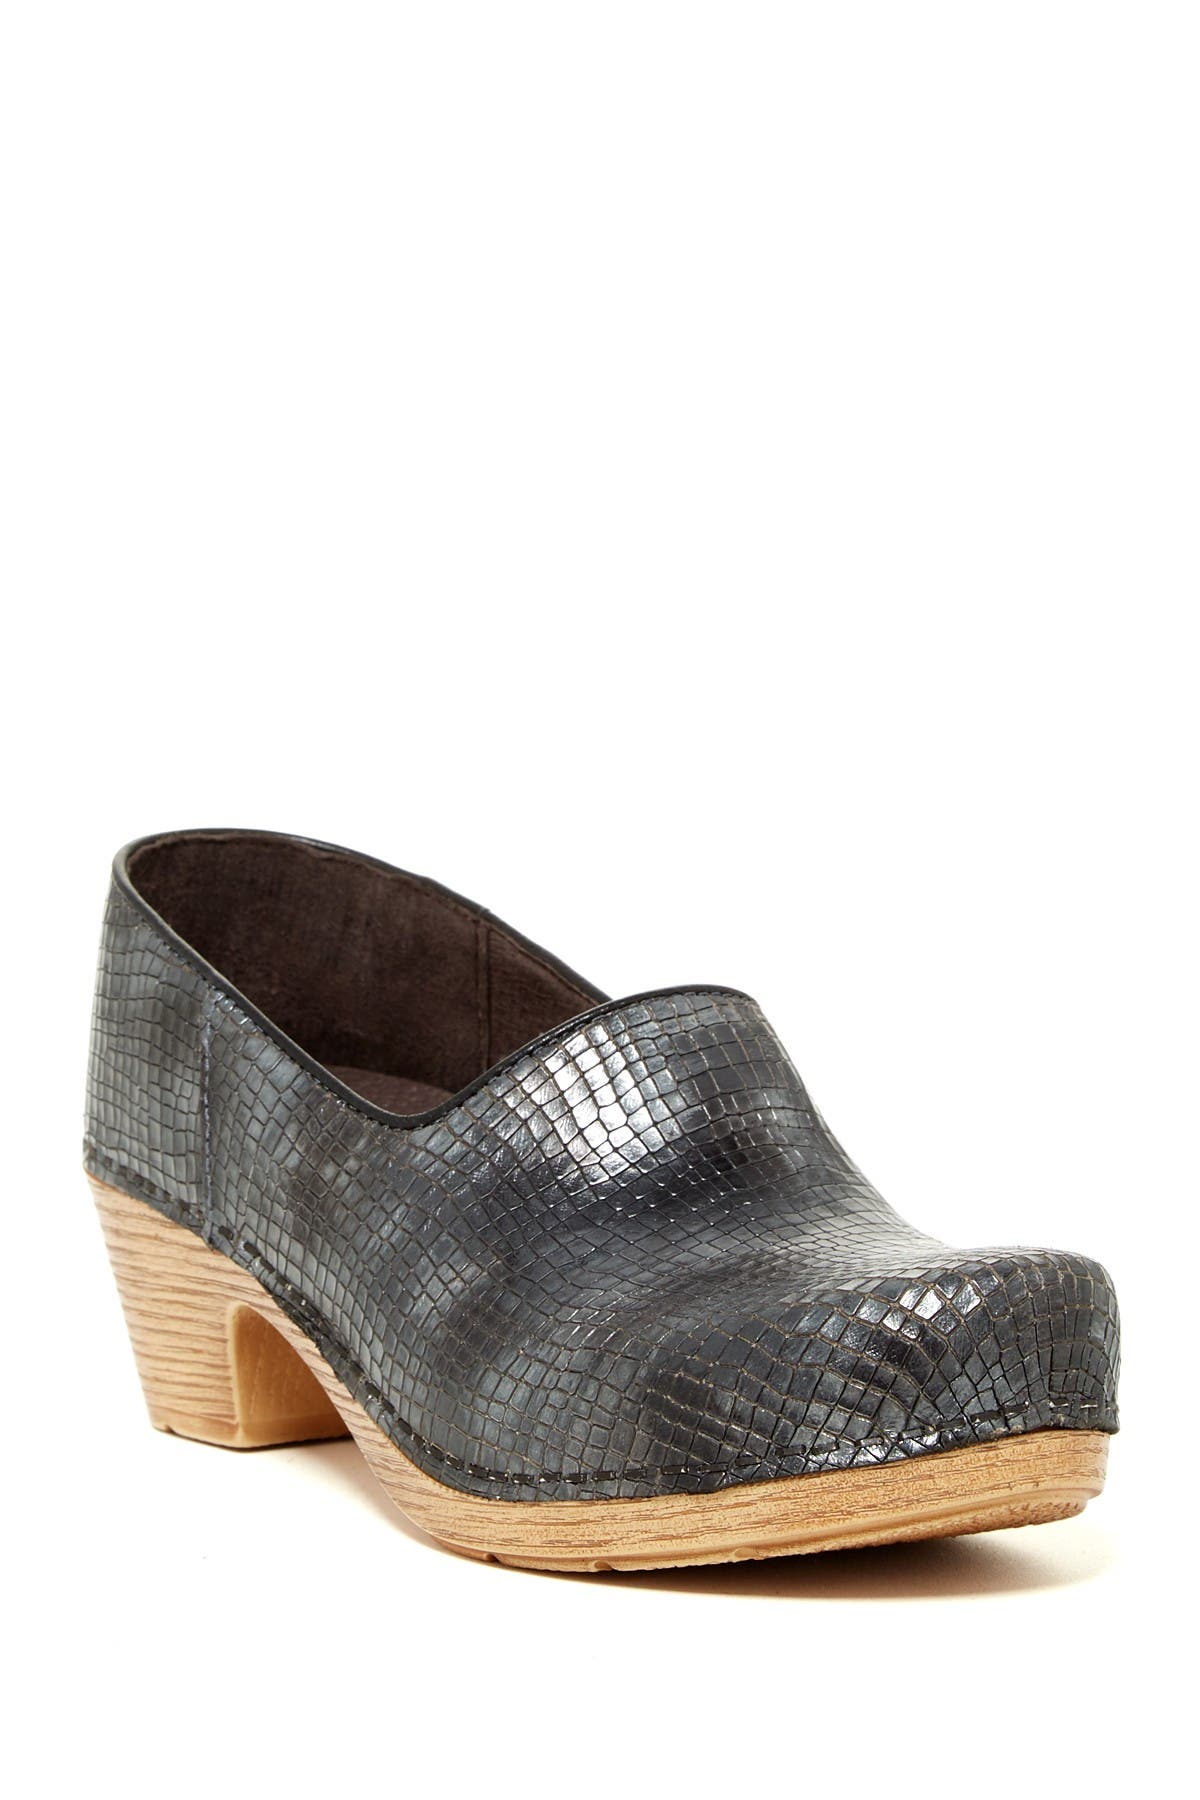 nordstrom pewter shoes